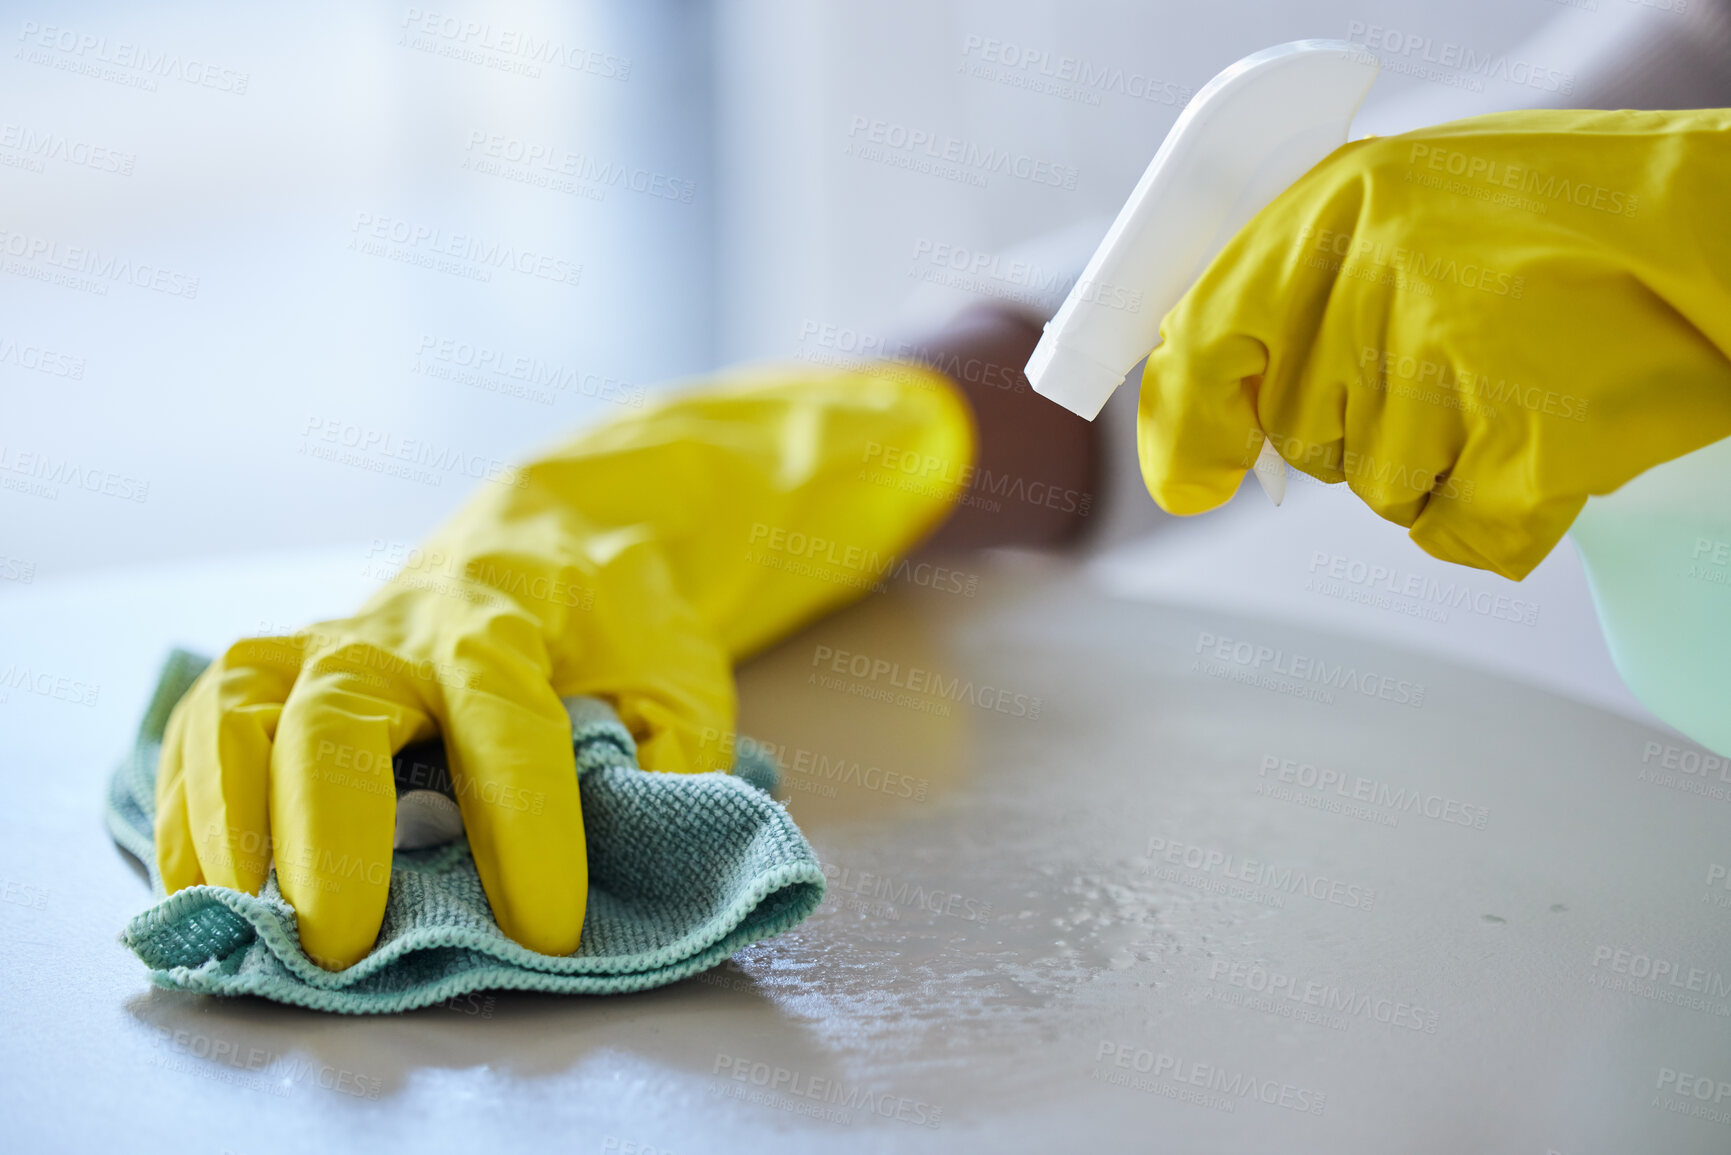 Buy stock photo Cleaning, housekeeping and hands with cloth and spray bottle to wipe, disinfect and clean furniture. Housework, spring cleaning and rubber gloves with detergents, cleaning products and chemical spray